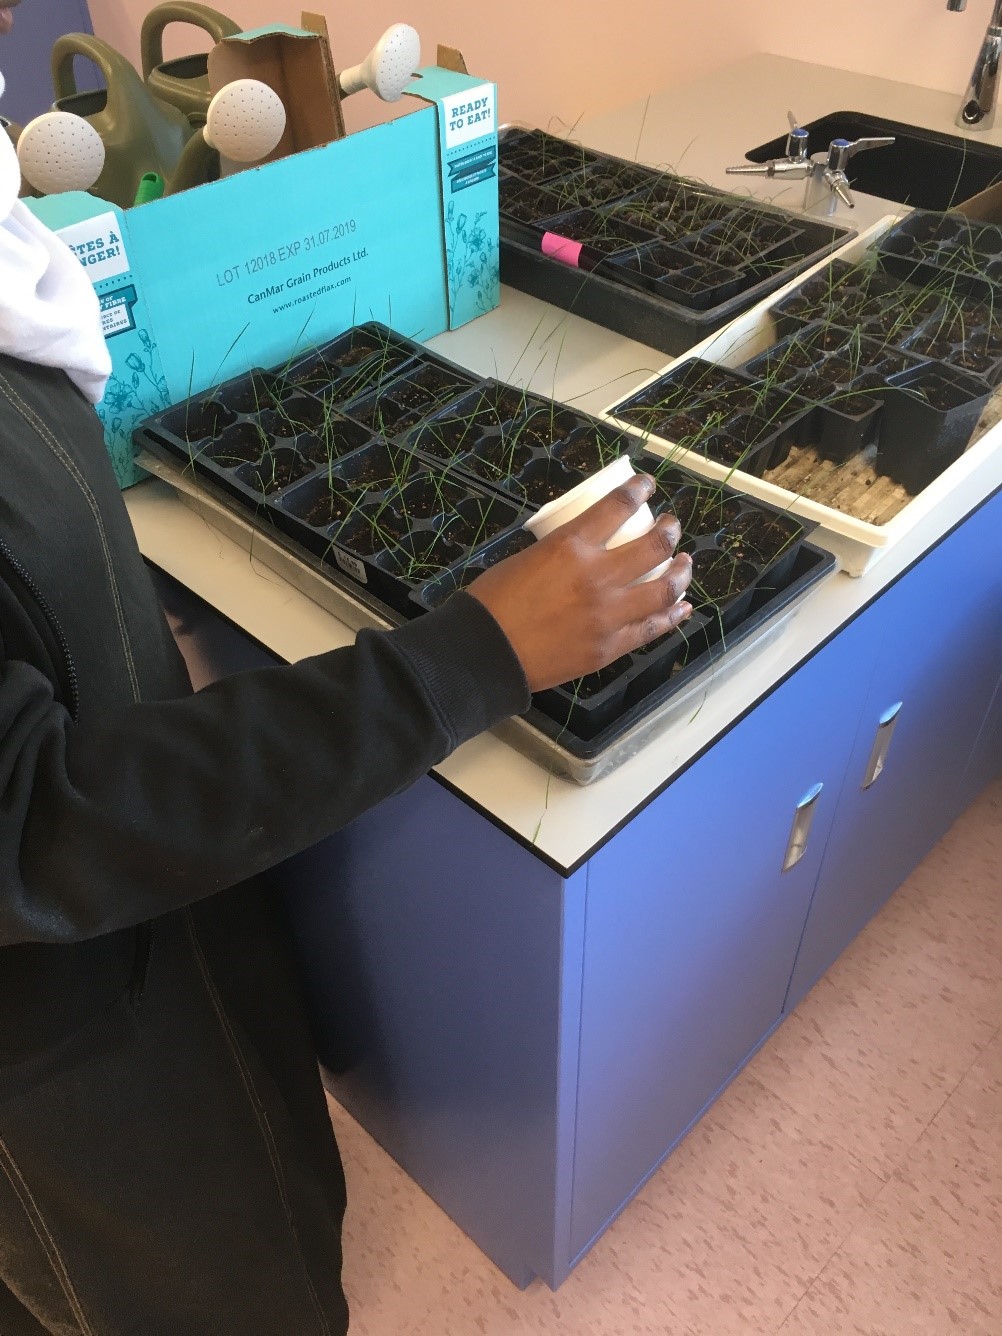 Students in a high school science lab water the seedlings they will plant.